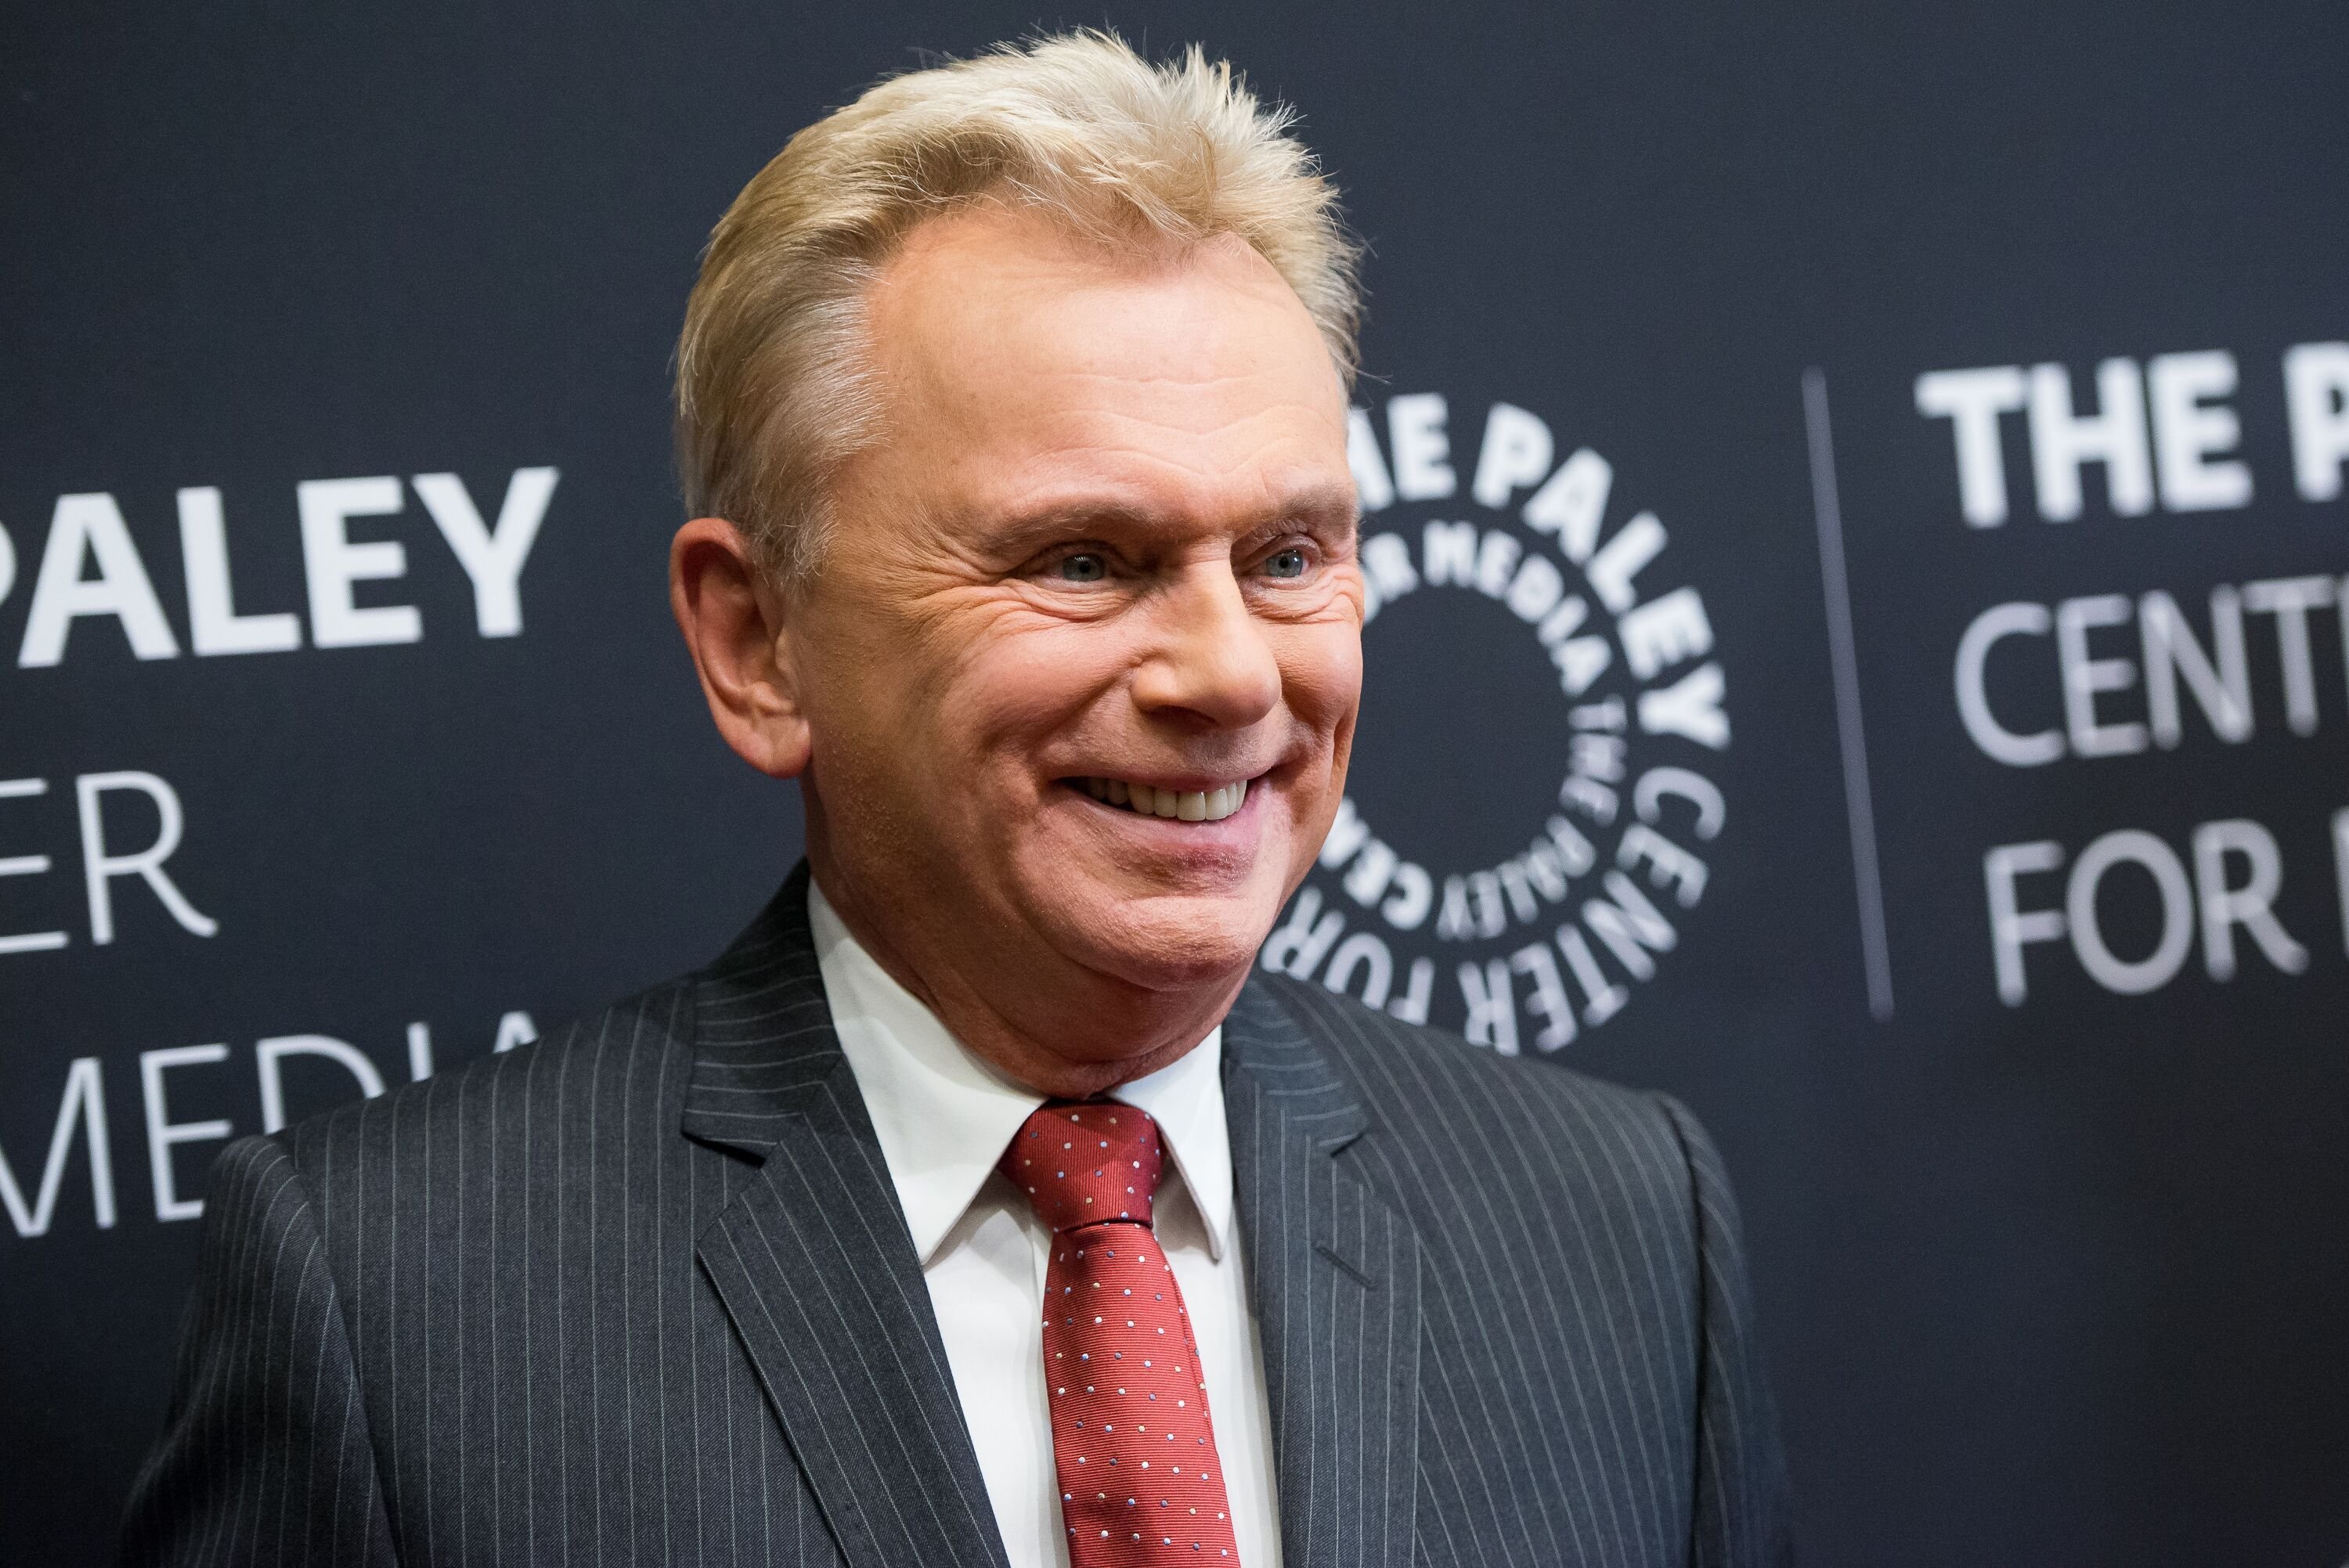 Pat Sajak at The Paley Center For Media Presents: Wheel Of Fortune: 35 Years As America's Game on November 15, 2017, in New York City | Photo: Mike Pont/Getty Images